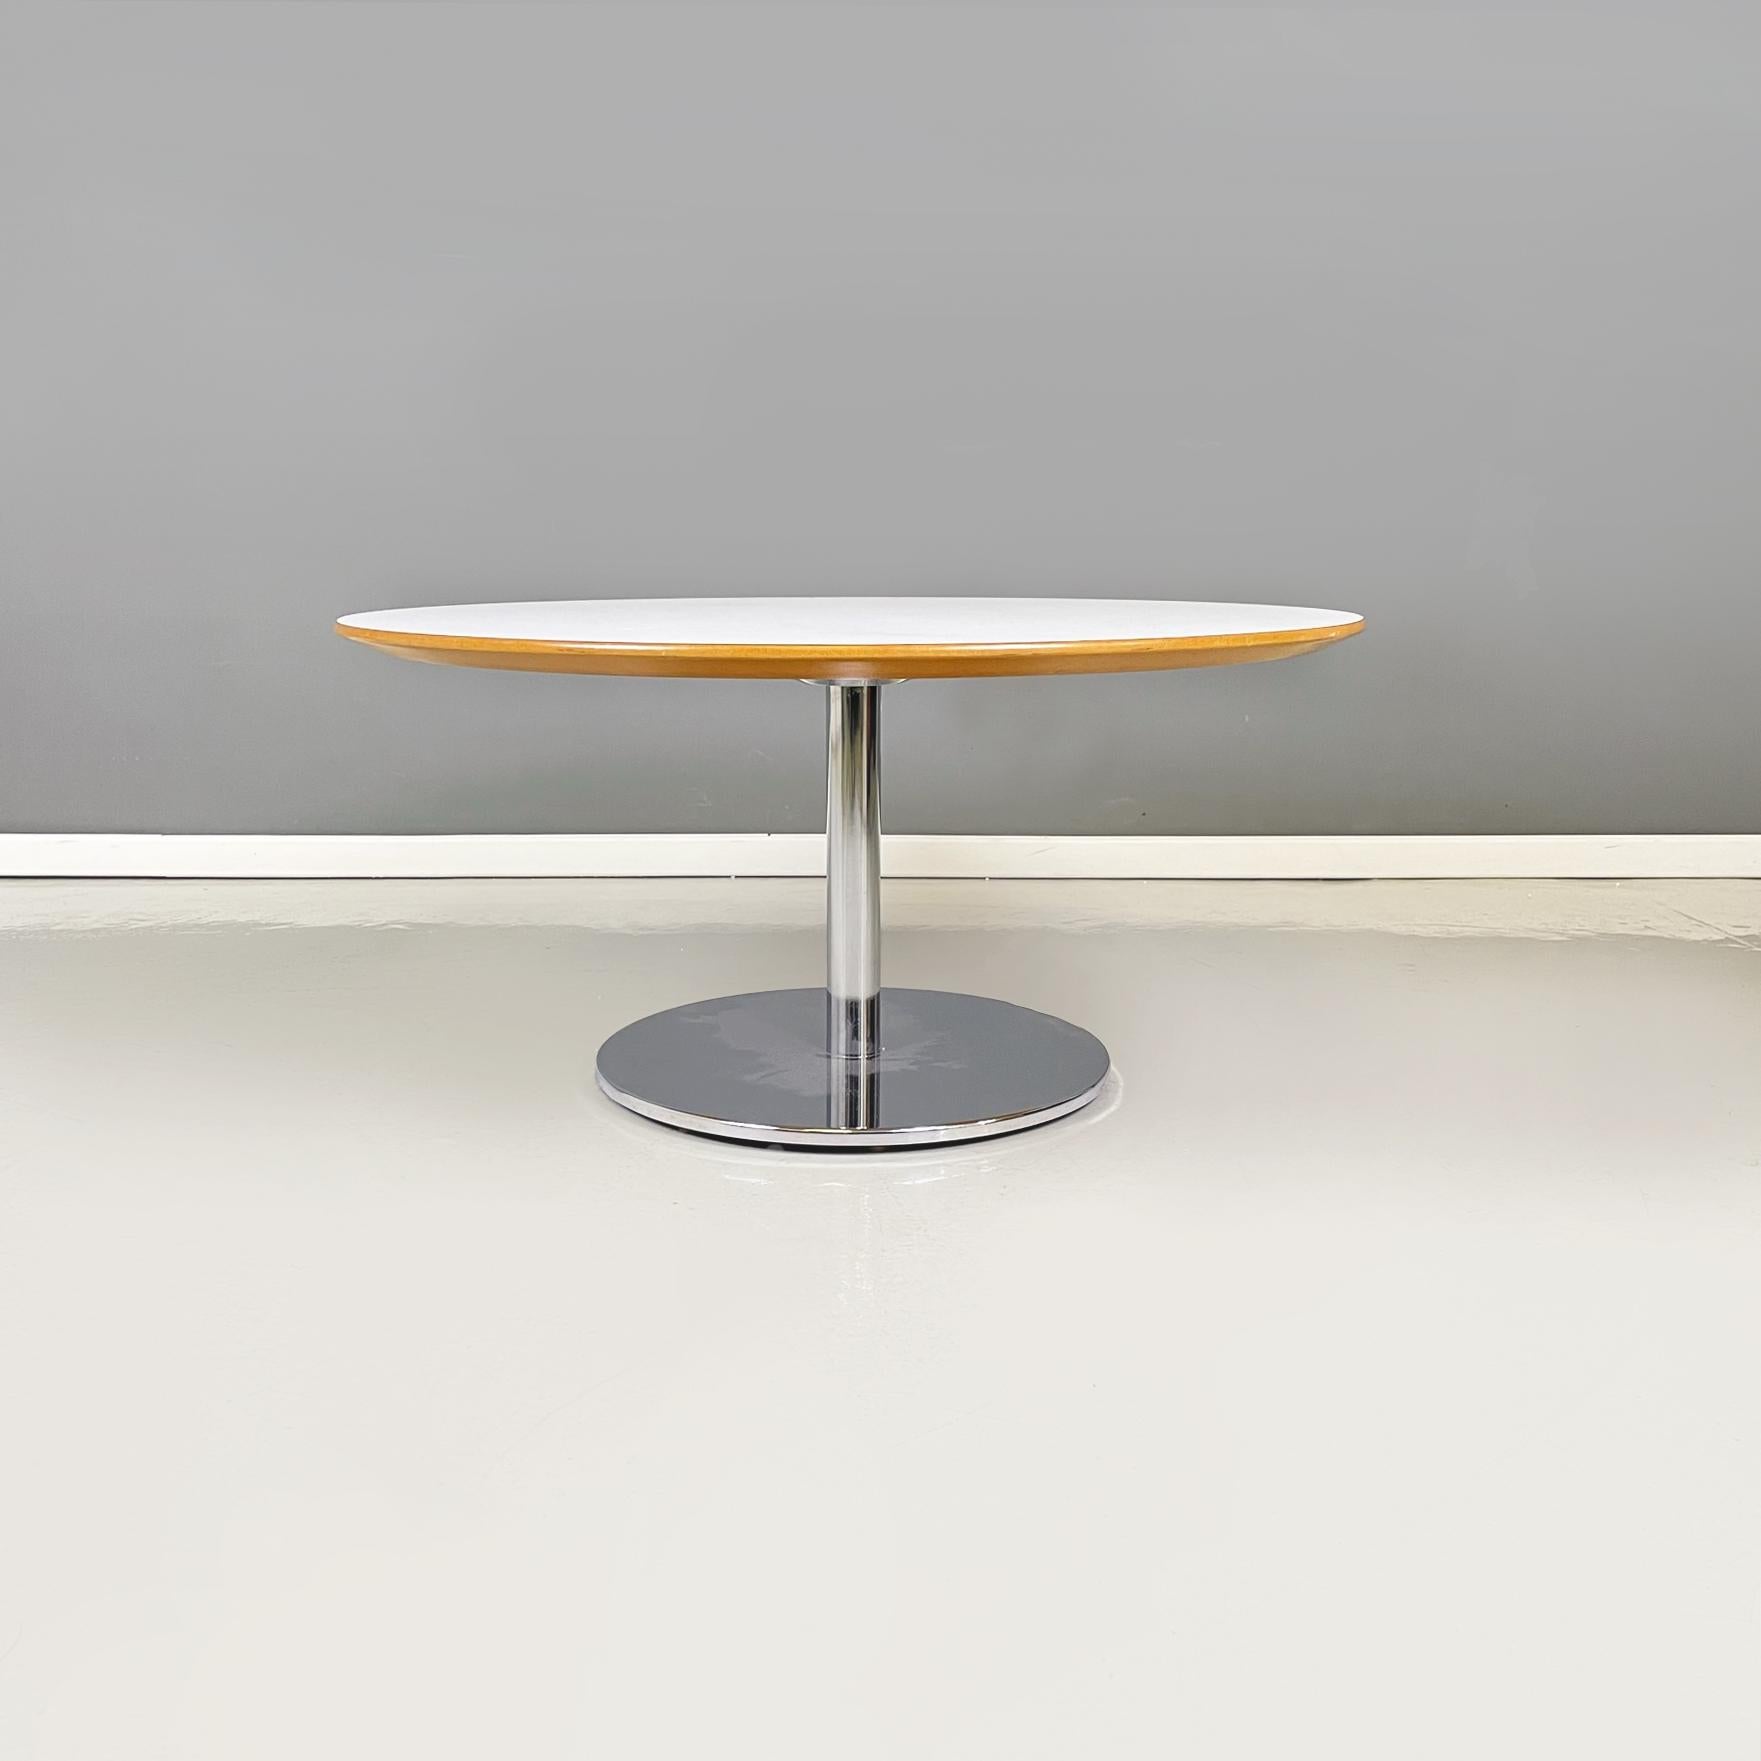 Italian modern Round coffe table in white wood and metal, 1980s
Round coffee table with light wood and white mdf wood top. The round section structure is in metal. Round metal base.
1980s 
Very good condition, this coffe table has a small flaw